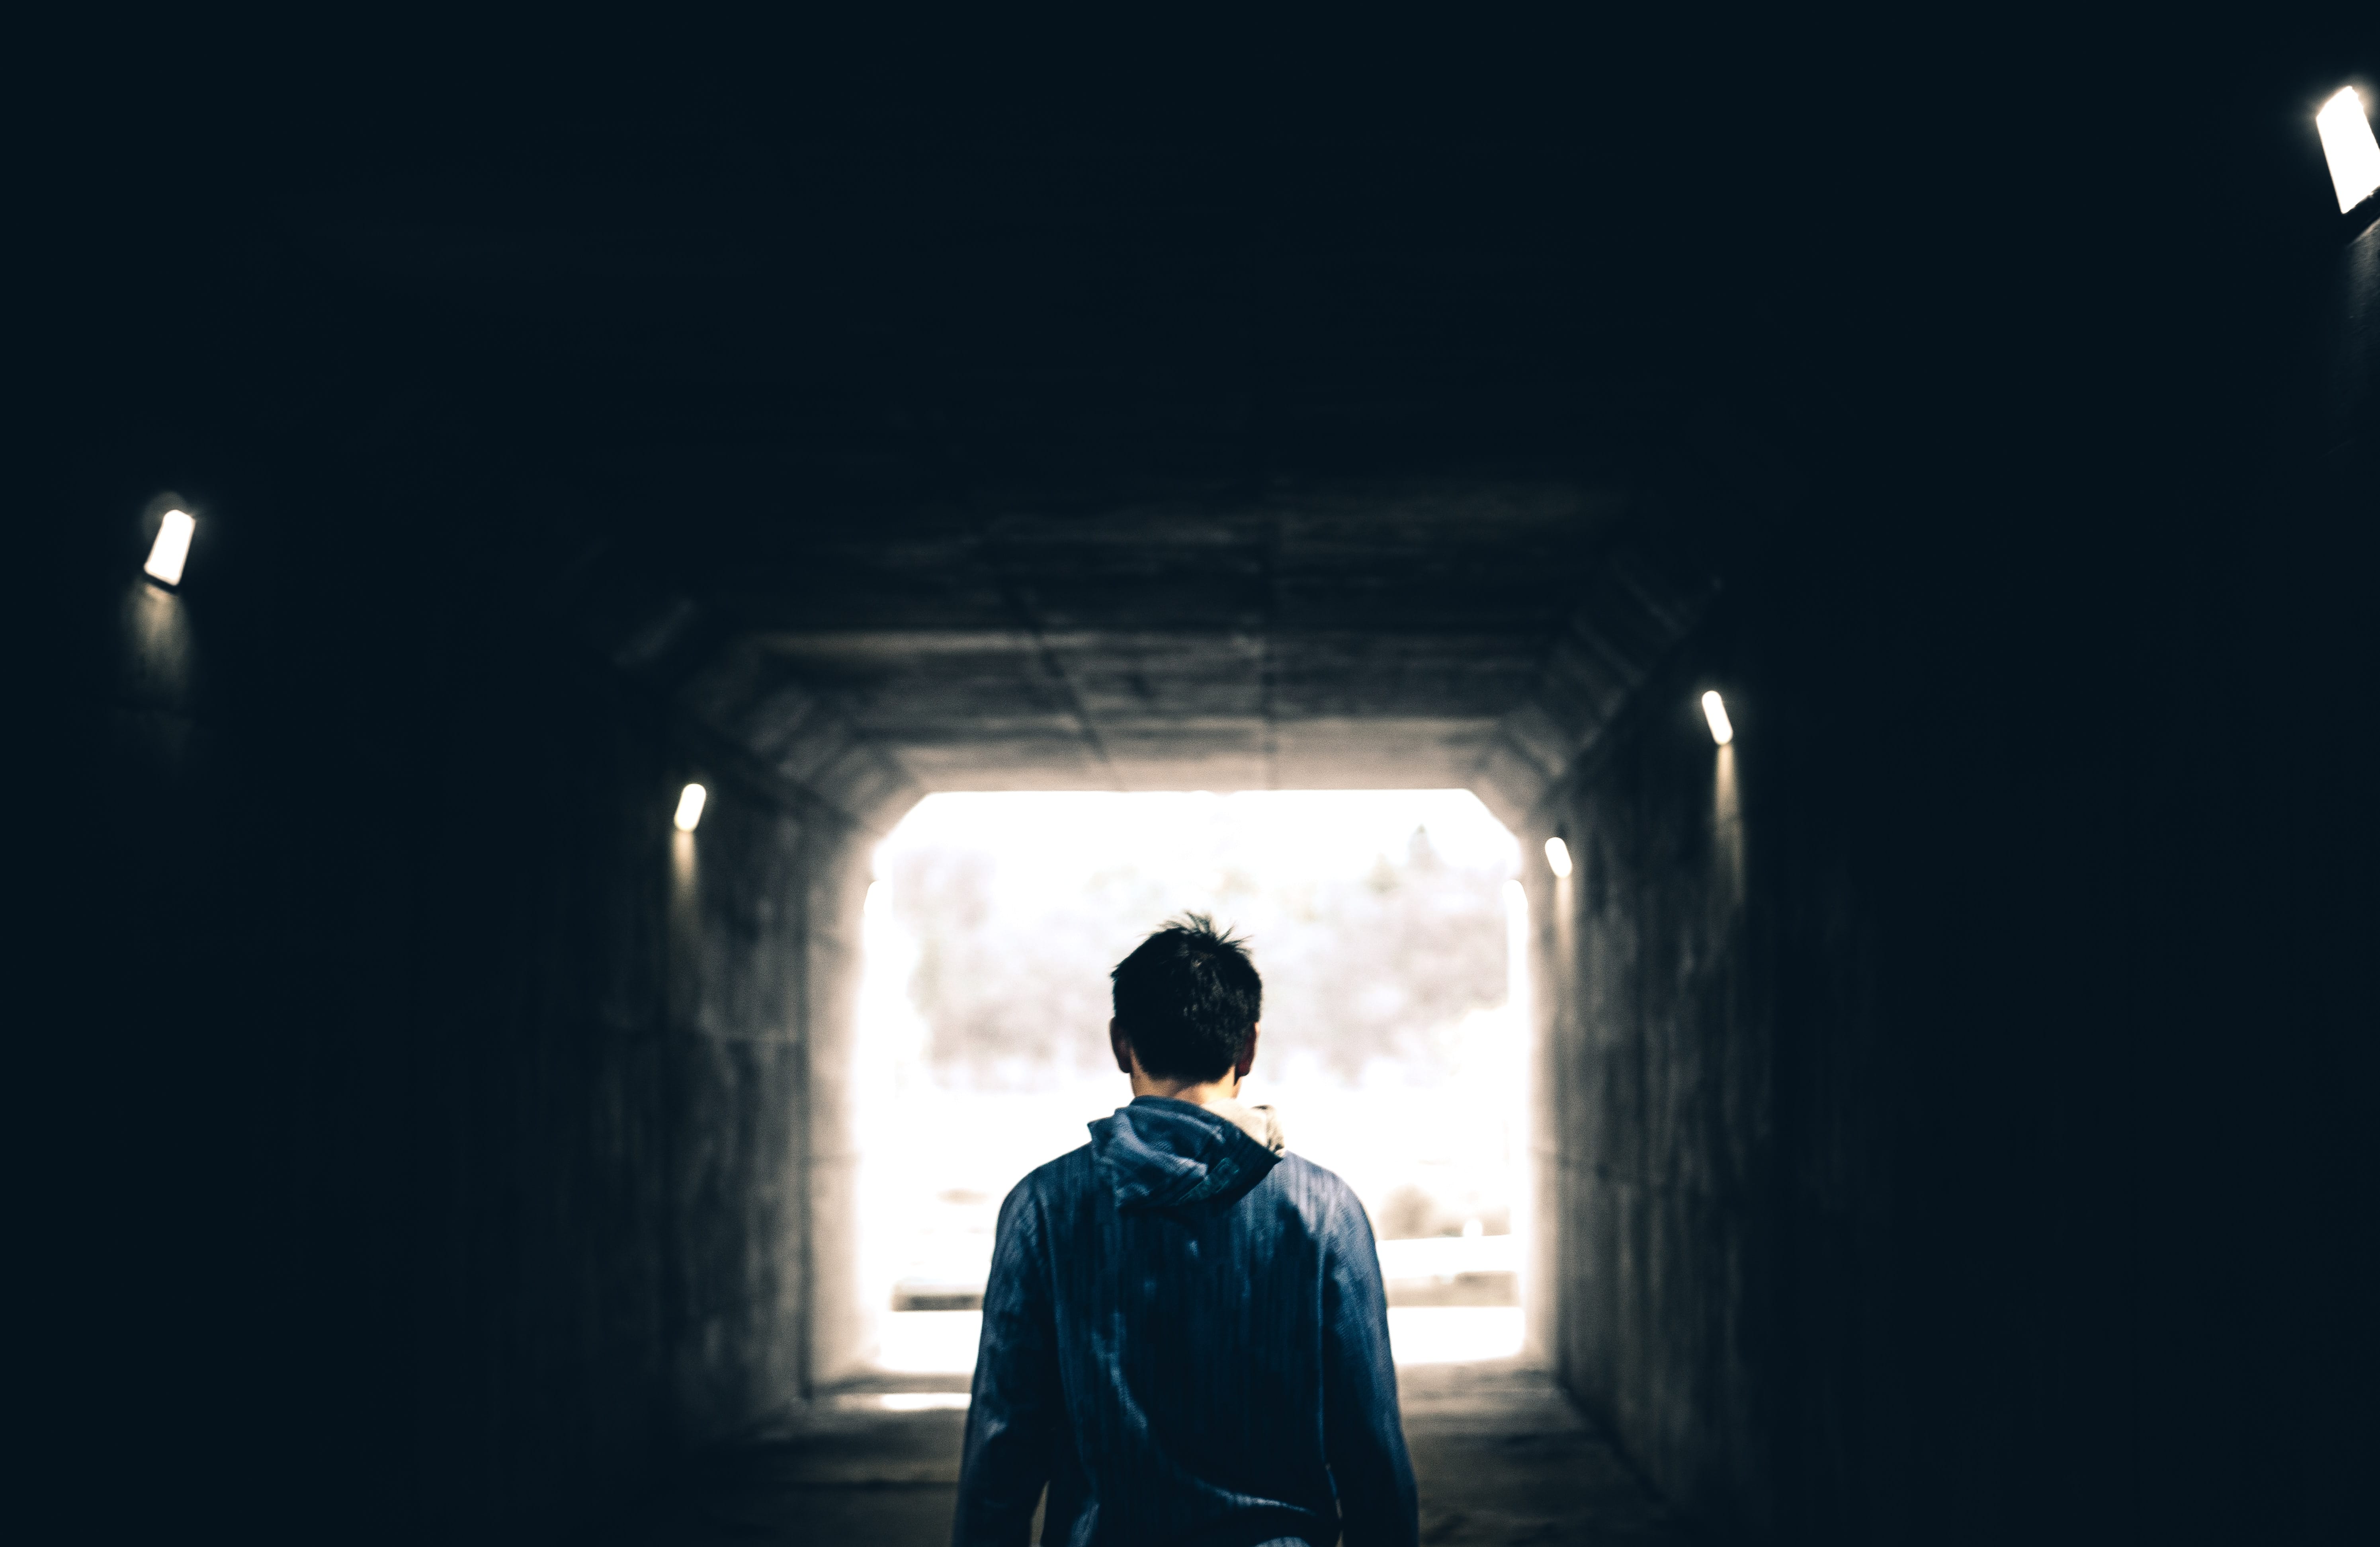 Man walking toward light at the end of a tunnel; image by Warren Wong, via Unsplash.com.